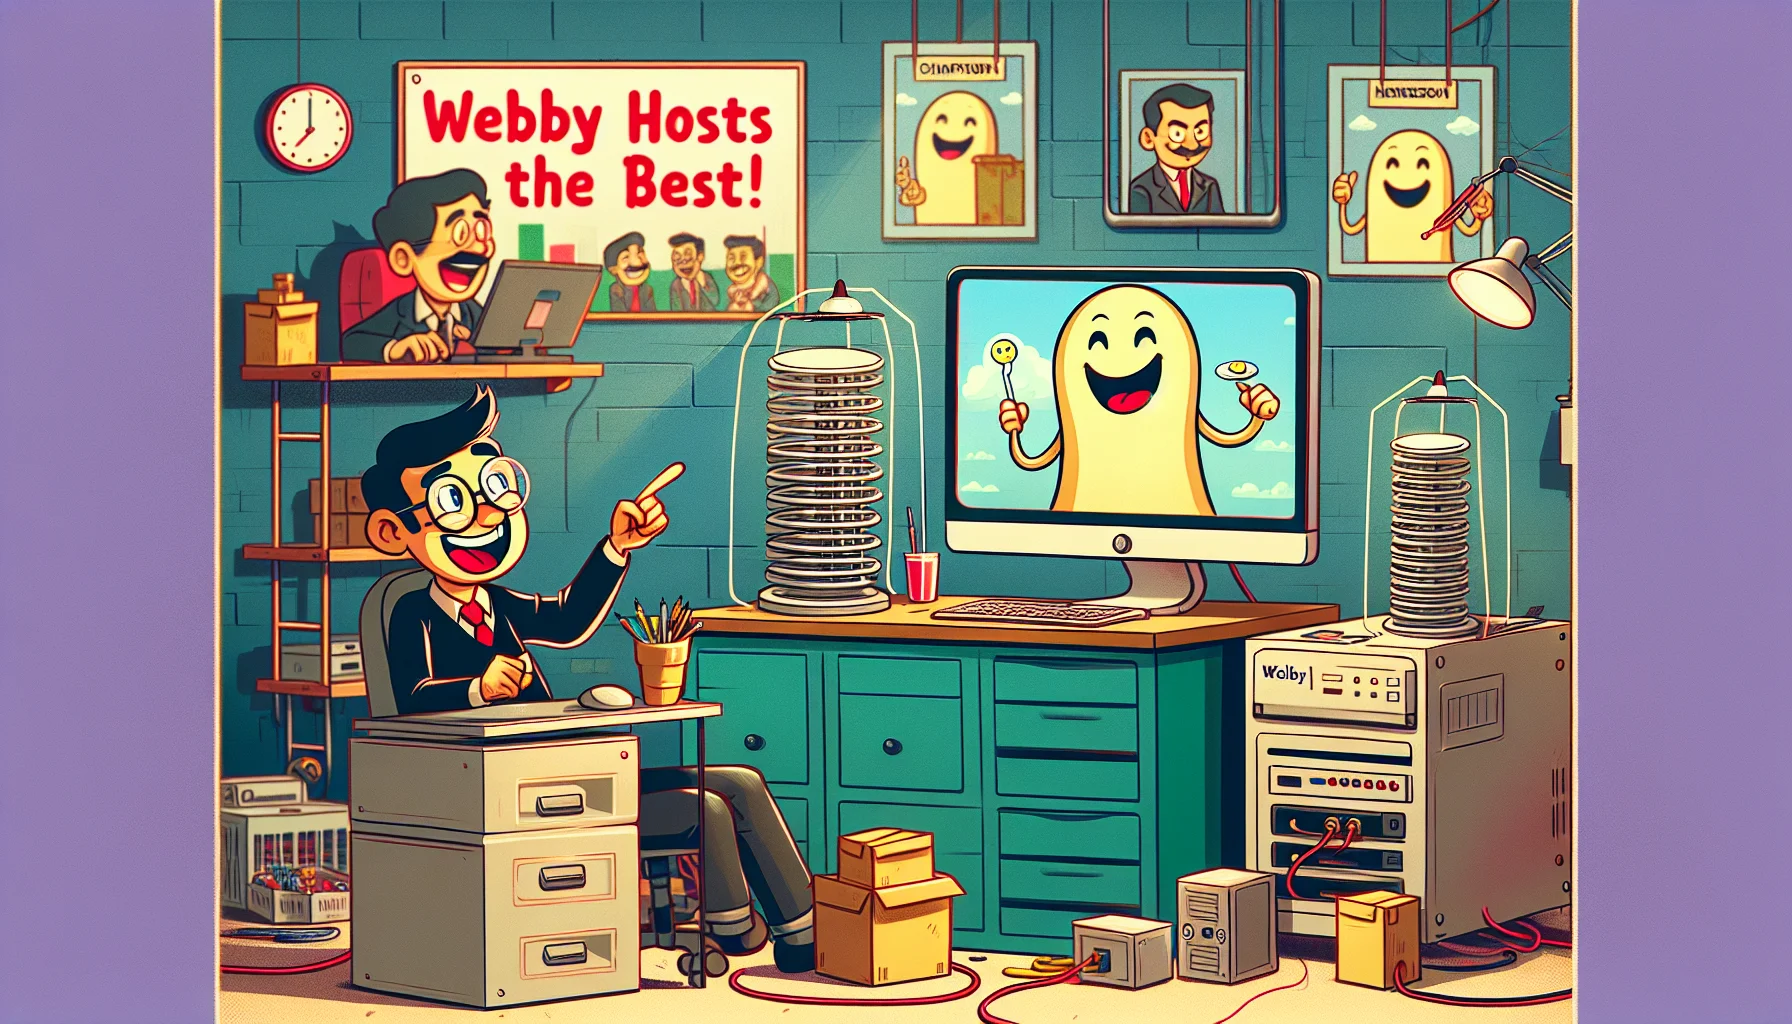 Imagine a humorous scene about web hosting. In the center, there's a tech-savvy person, perhaps a South Asian male, sitting in front of a computer with a big smile on his face, his finger pointing at the screen which displays a happy caricature of a cute, stick-like creature representing a web server, let's call it 'Webby'. Around him, there's an environment that signifies a small business setting, with machines, posters reflecting productivity and growth. A billboard in the background humorously exclaims, 'Webby hosts the best!' capturing the spirit of enticing web hosting.